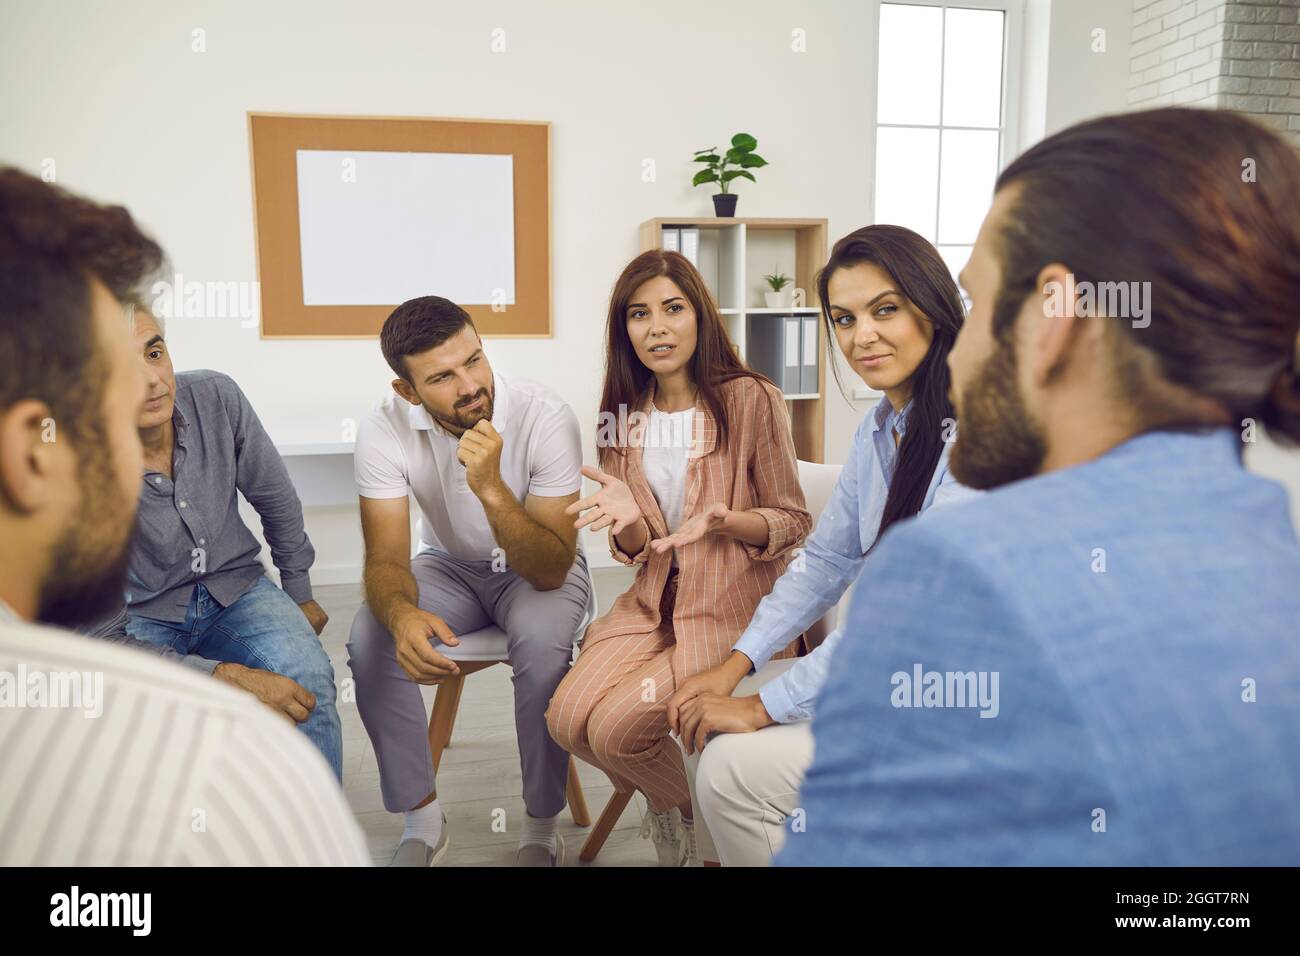 Female psychologist provides help and advice to people who came to the support group meeting. Stock Photo